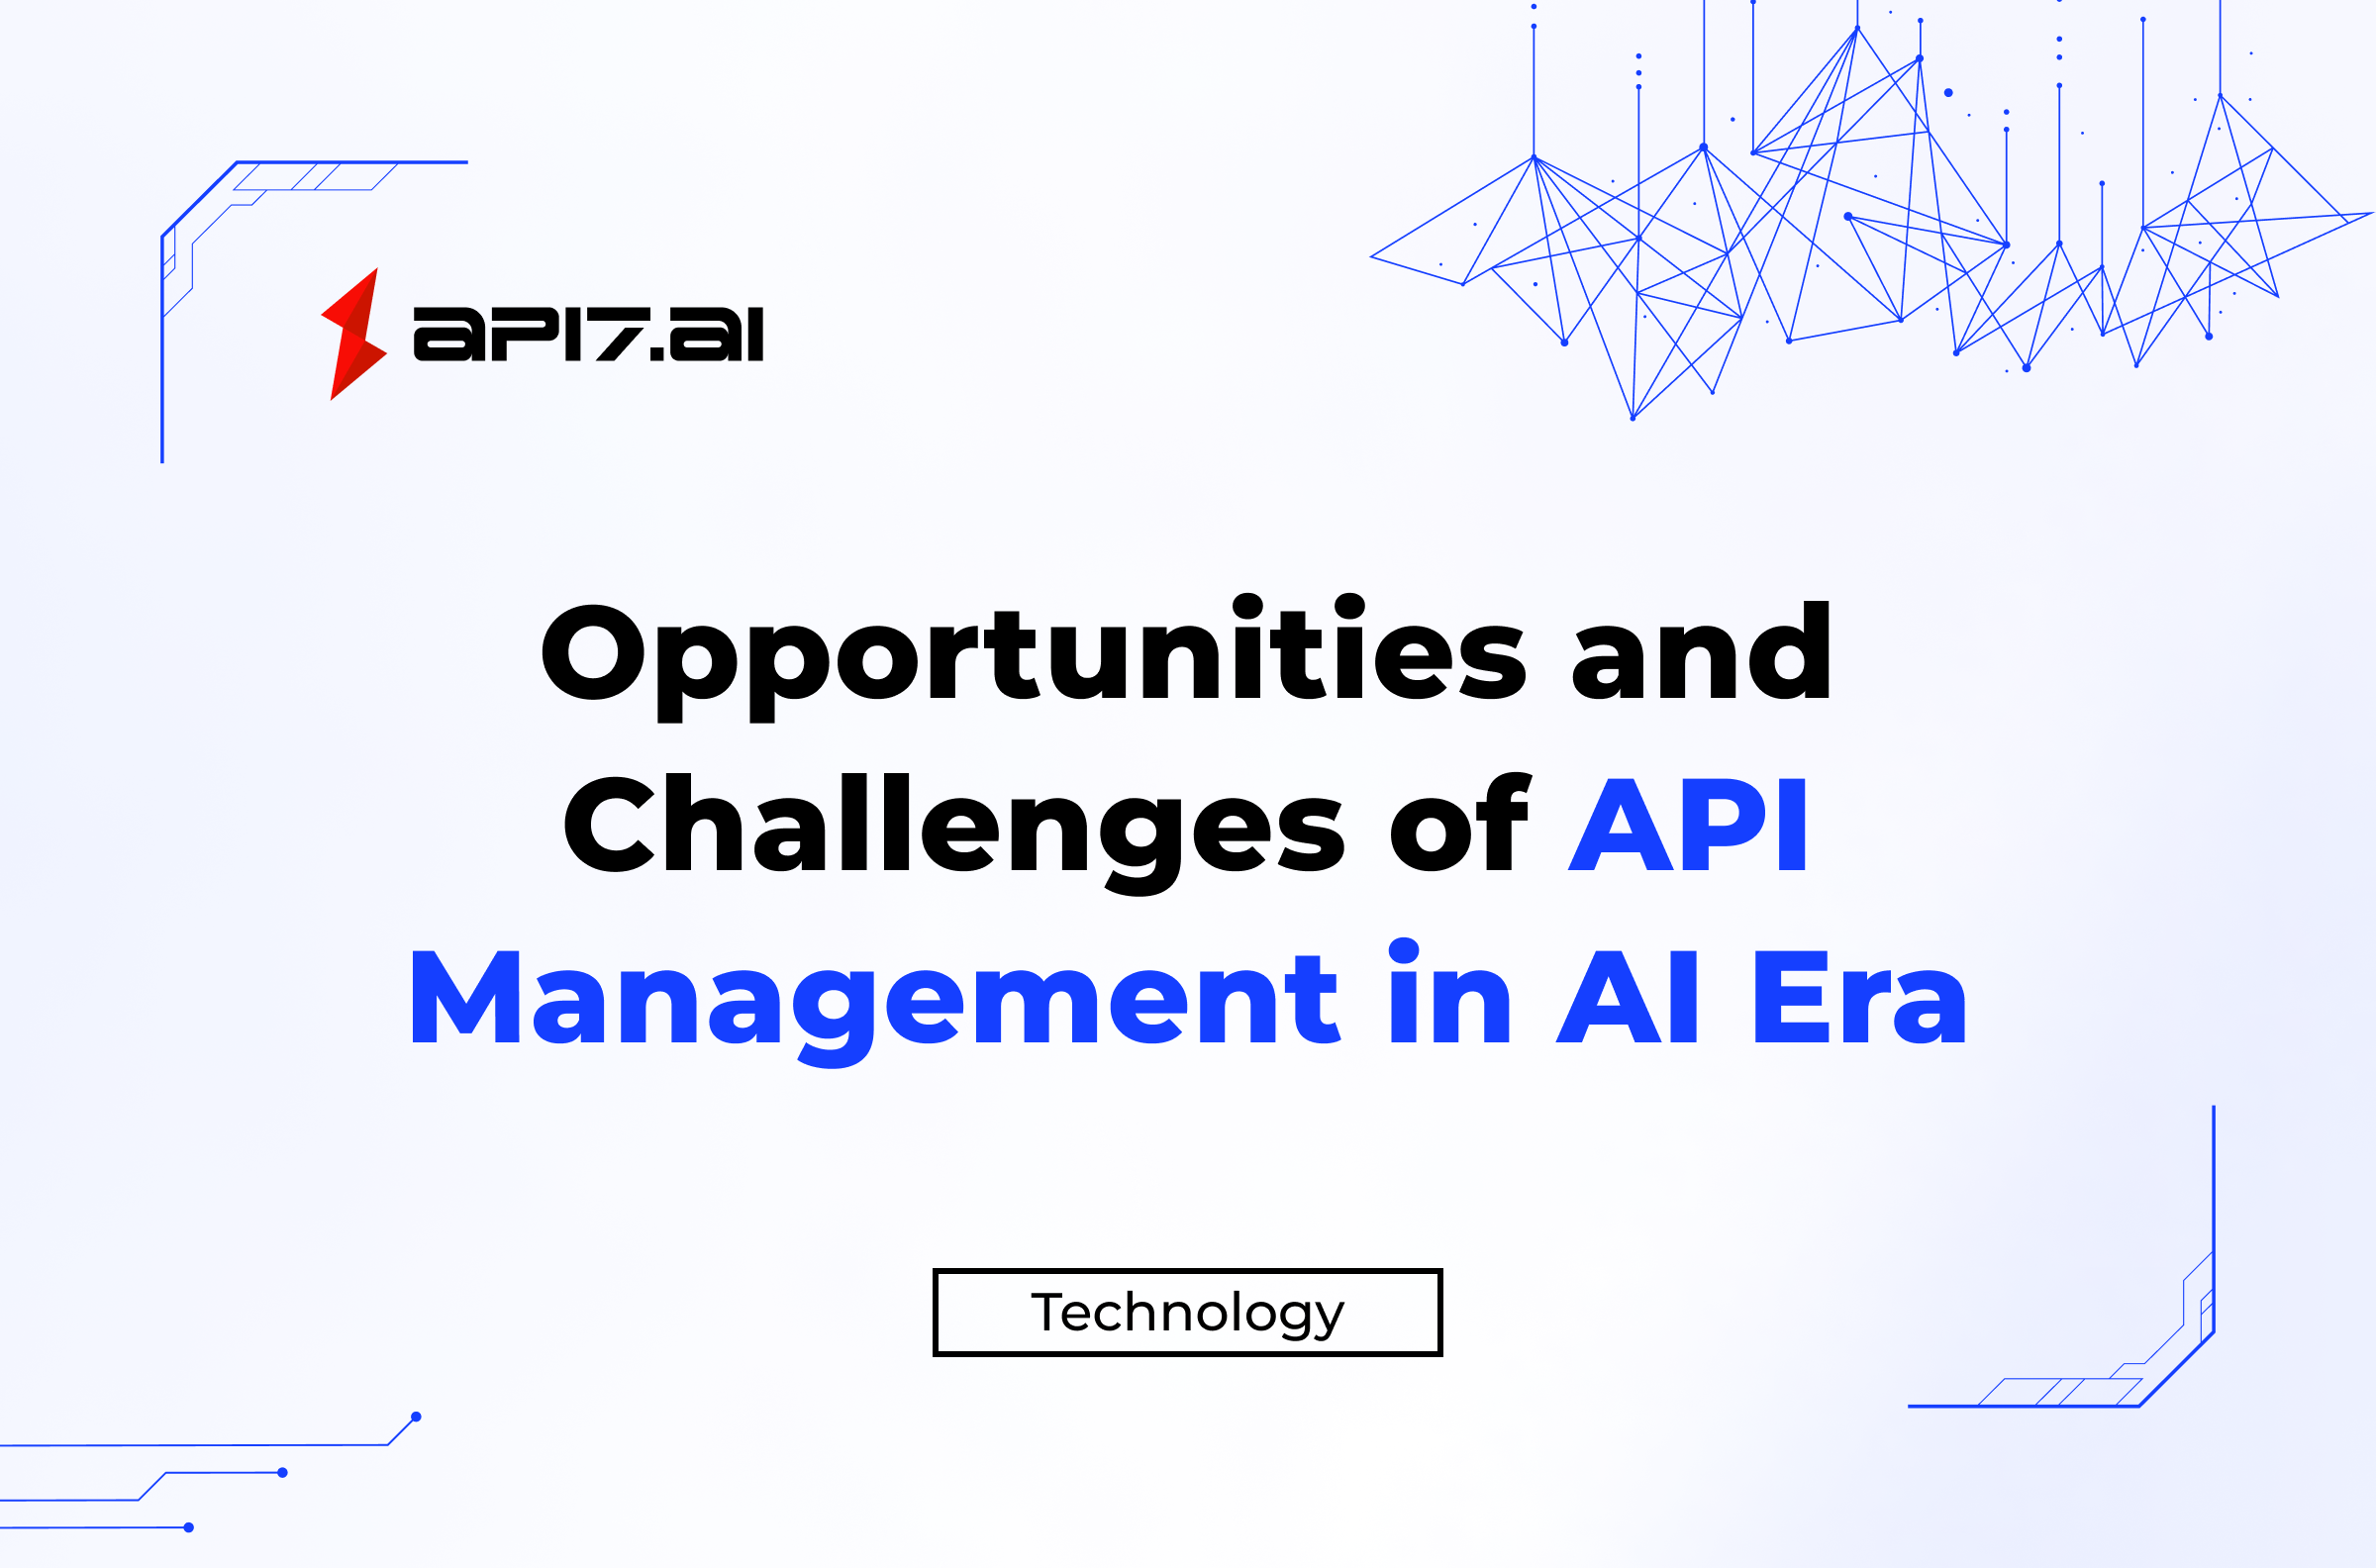 Opportunities and Challenges of API Management in the AI Era